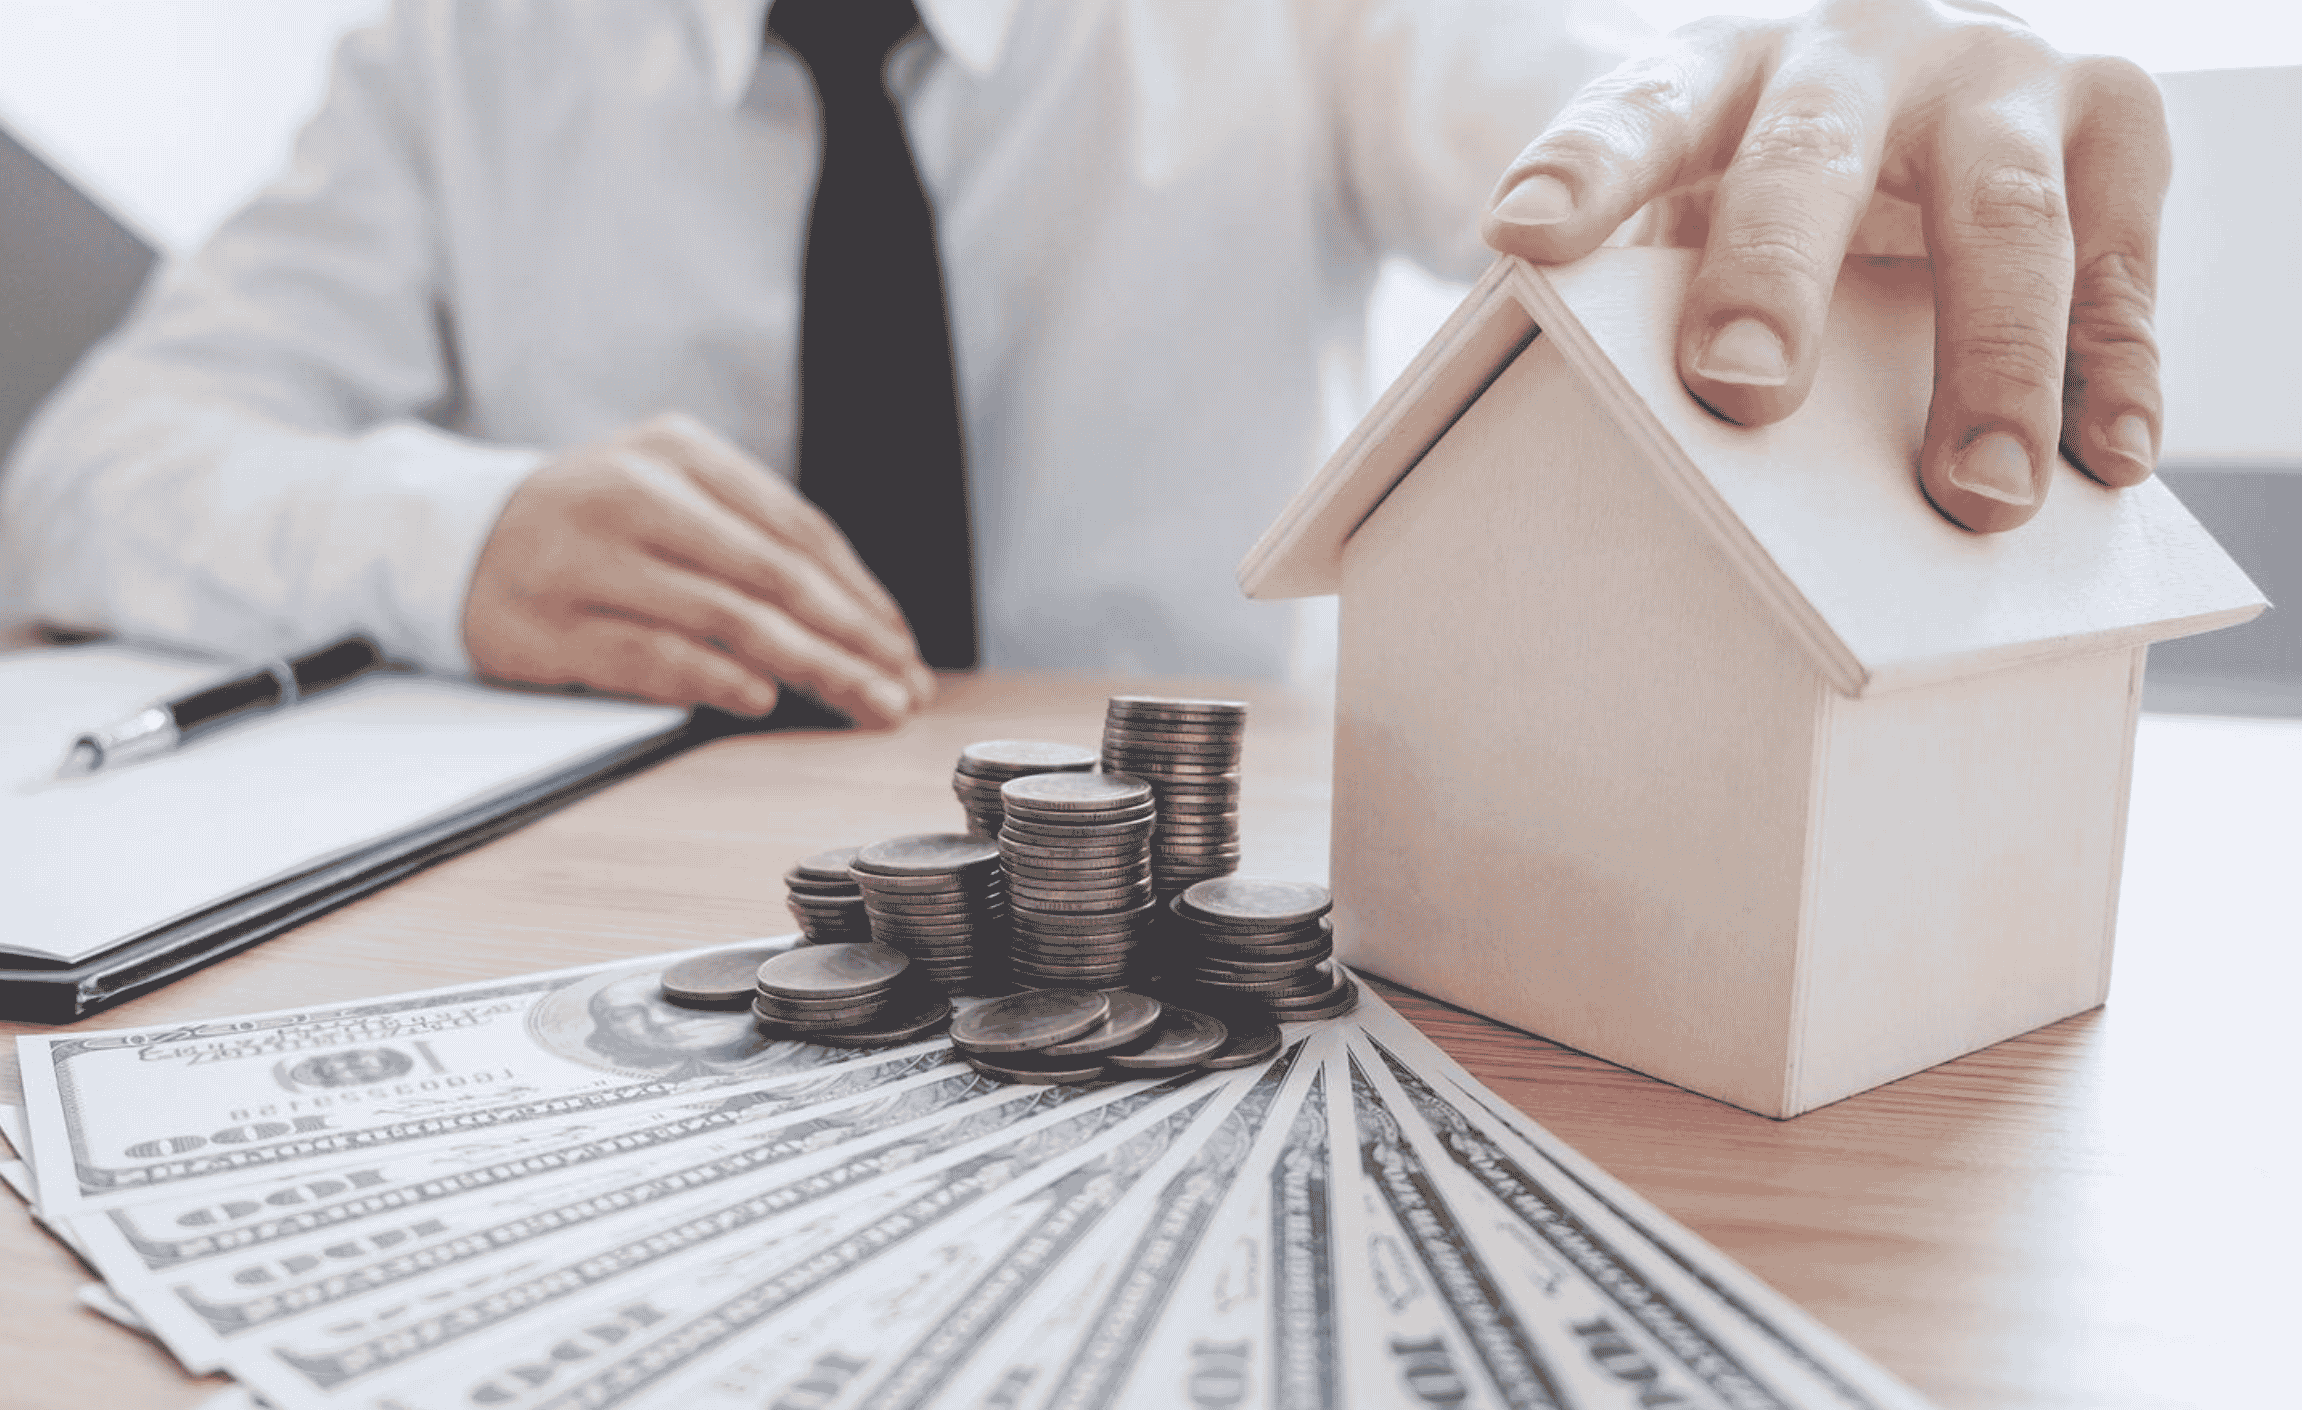 4 Hard Money Loans Top Benefits in Real Estate